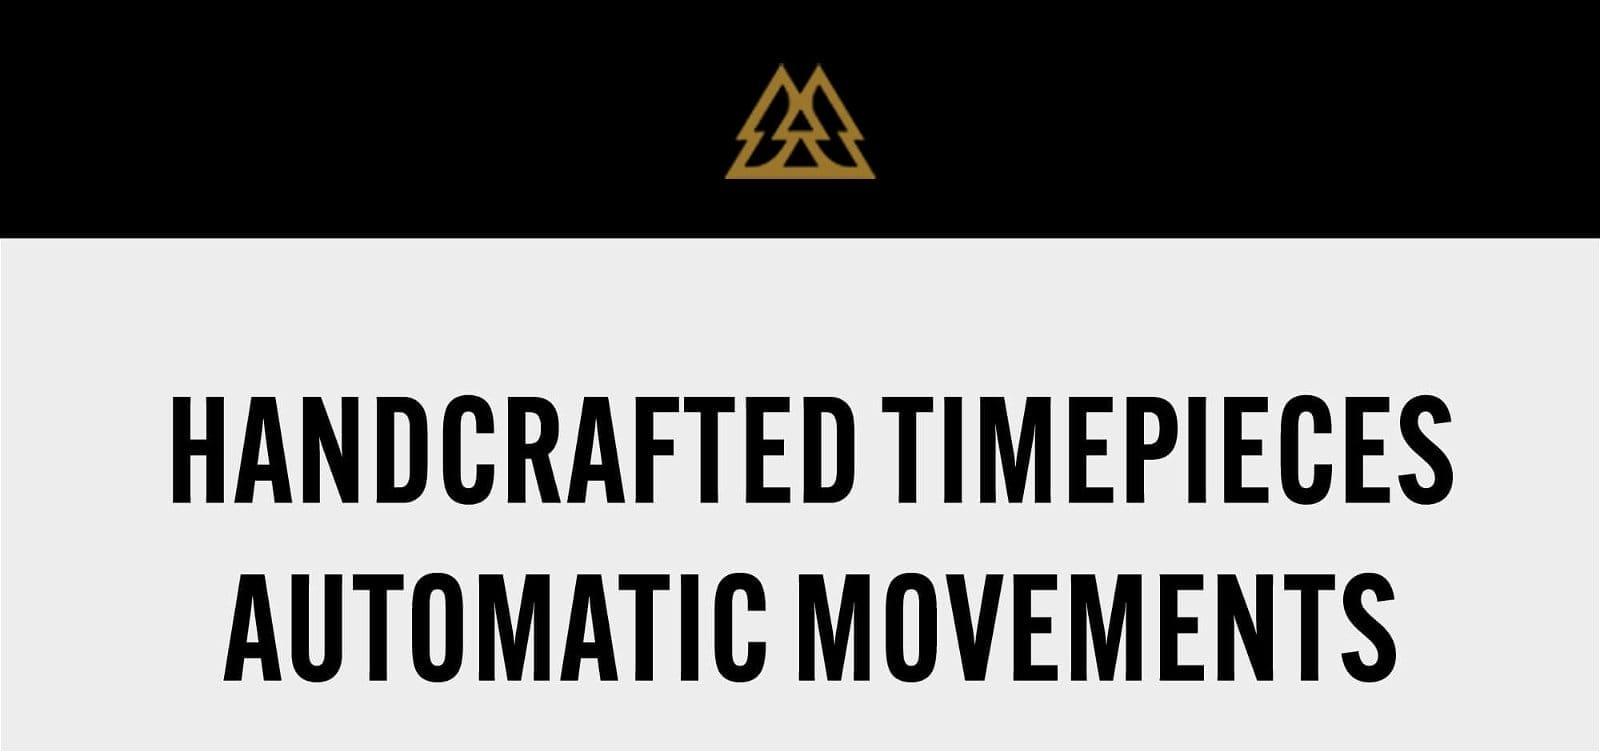 HANDCRAFTED TIMEPIECE WITH AUTOMATIC MOVEMENTS by Original Grain Now Available